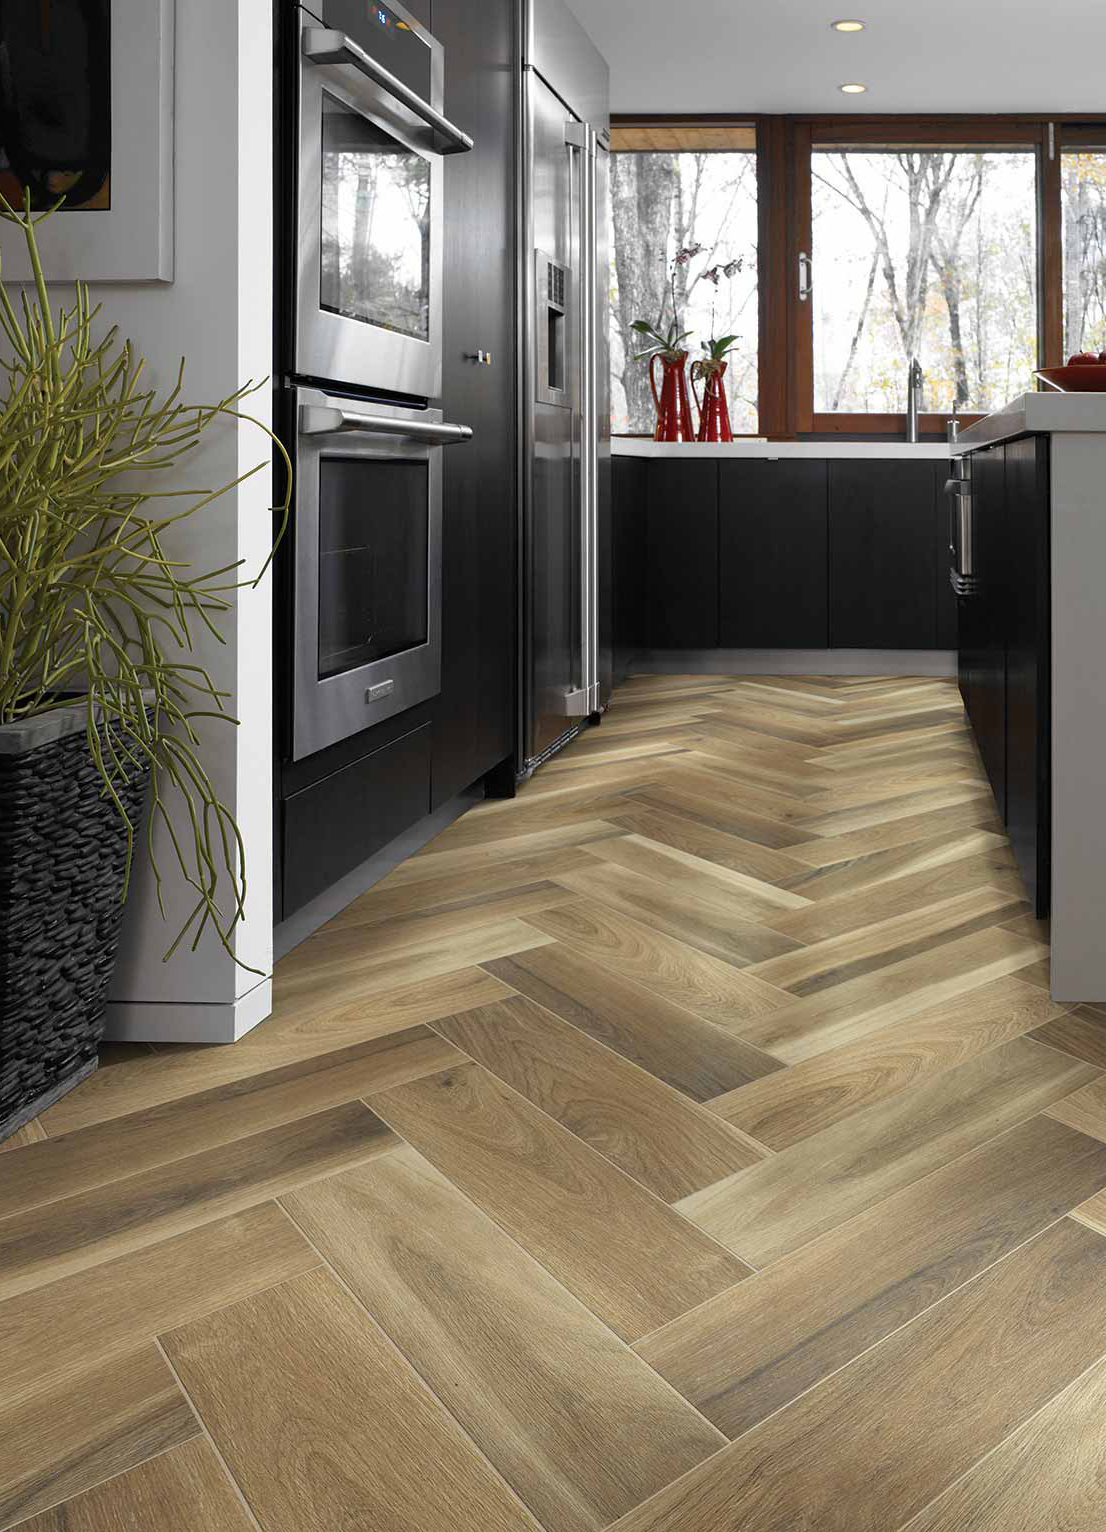 Tile floor in a herringbone patter in a kitchen from Top Notch Flooring America in Bel Air, MD